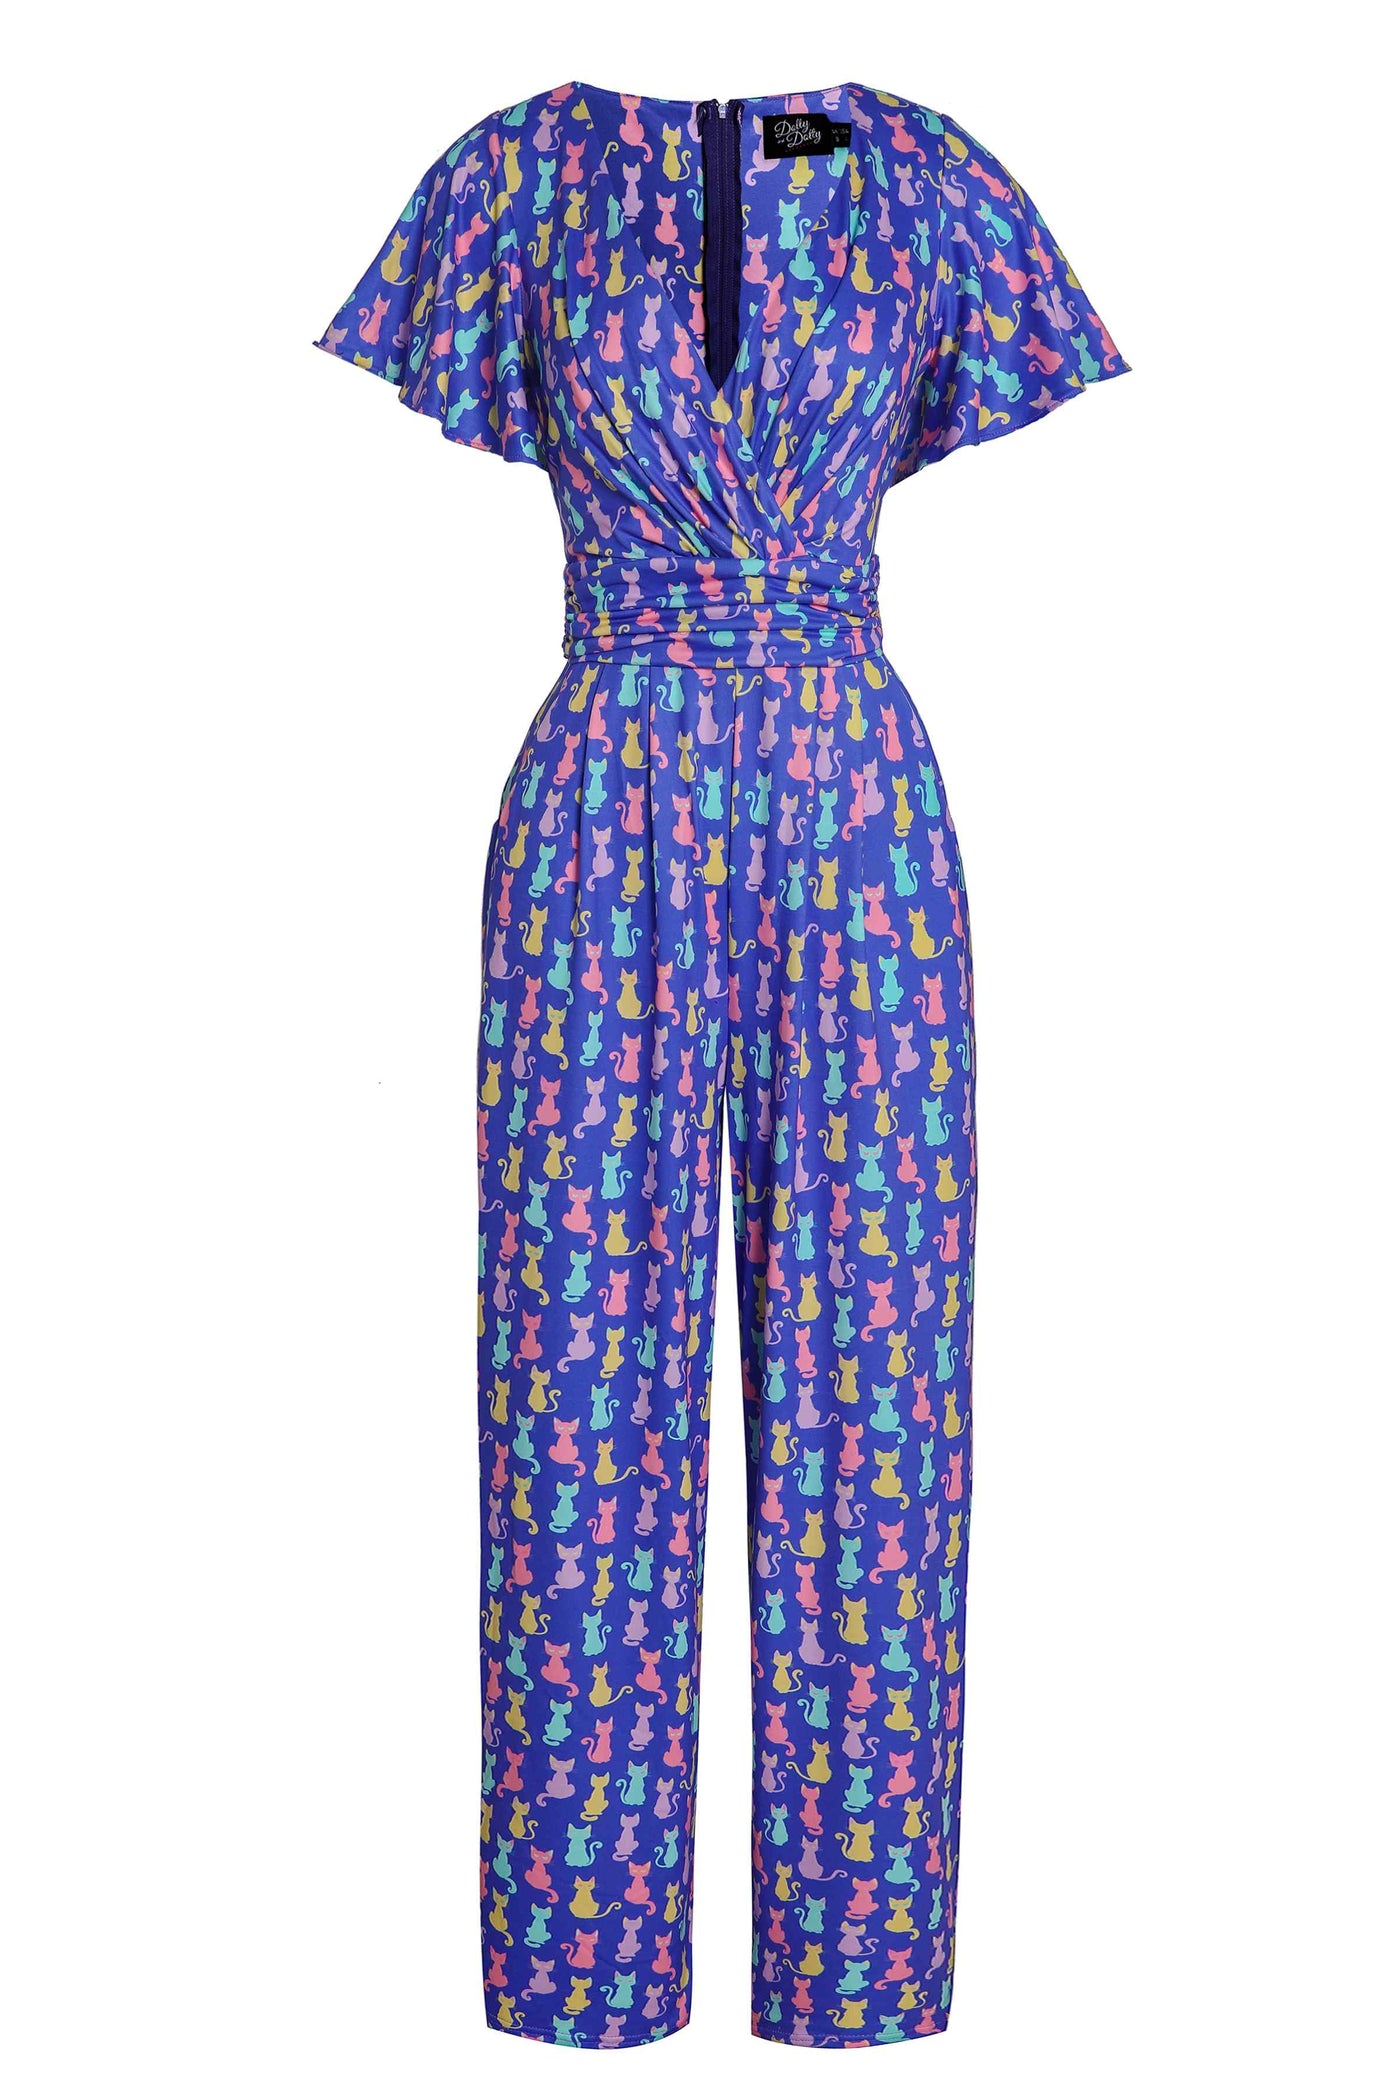 Front View of Quirky Purple Rainbow Cat Jumpsuit